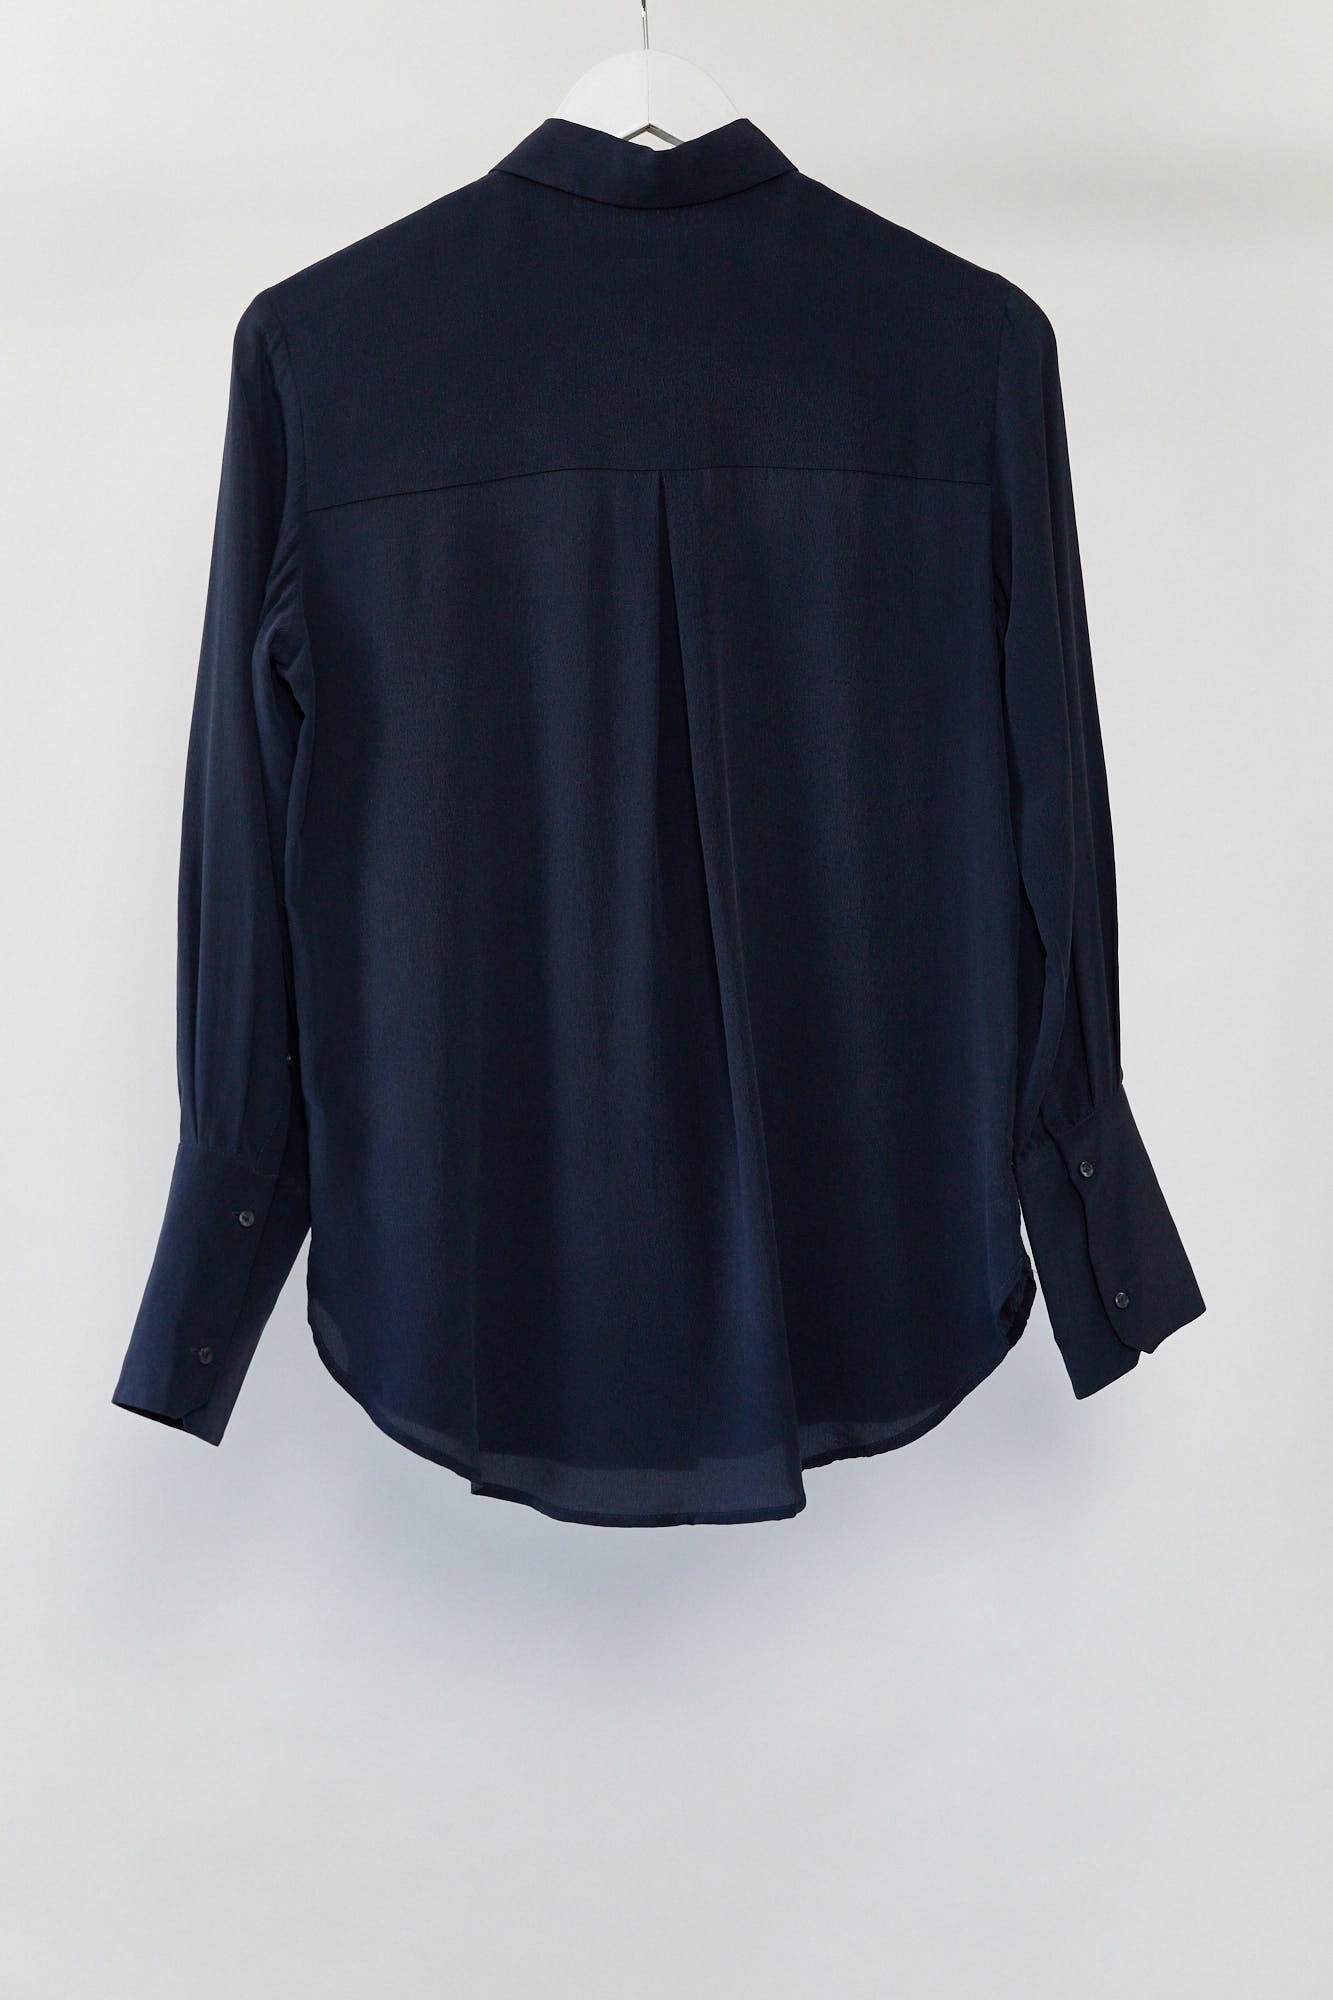 Womens & Other Stories Navy Silk blouse size small